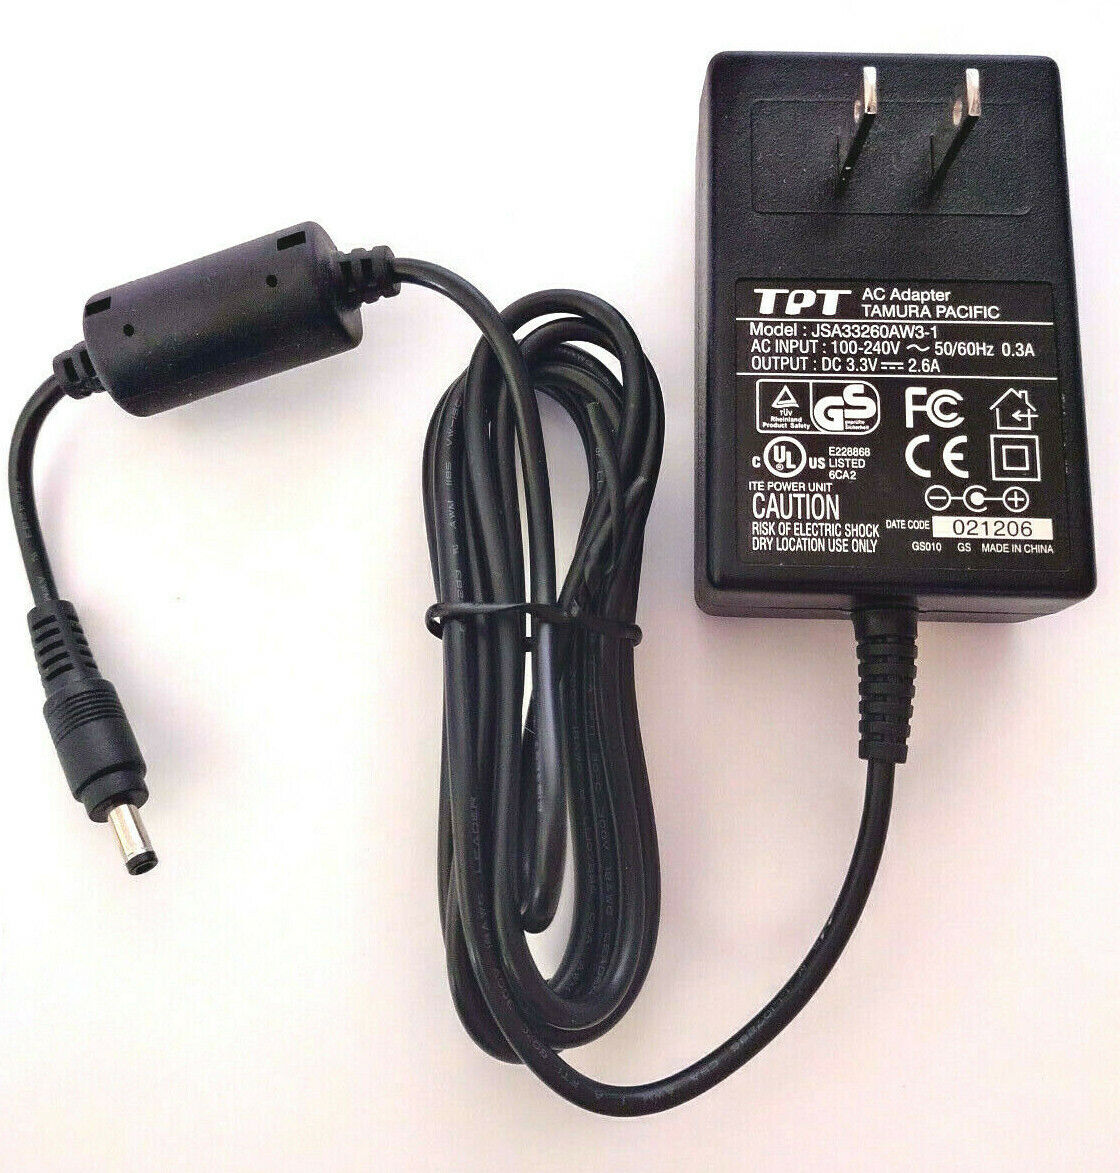 AC Adapter For Yamaha PSR170 PSR-275 Keyboard Wall Charger Power Supply Cord PSU Brand Unbranded Type Adapter Outp